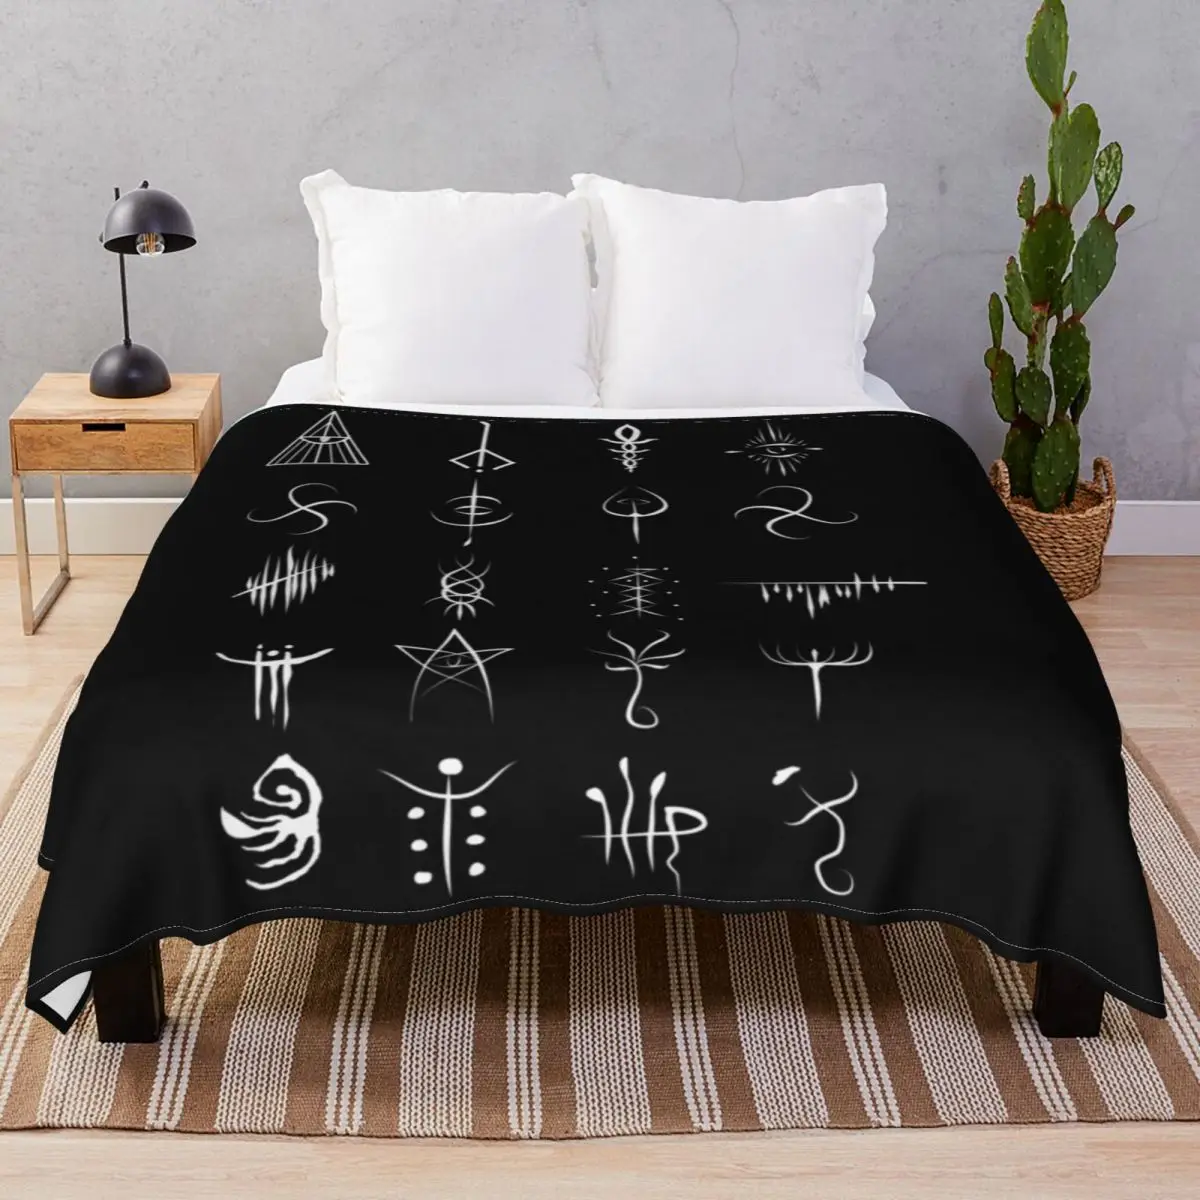 Bloodborne Caryll Runes Blanket Flannel Plush Print Multifunction Throw Blankets for Bed Sofa Travel Office